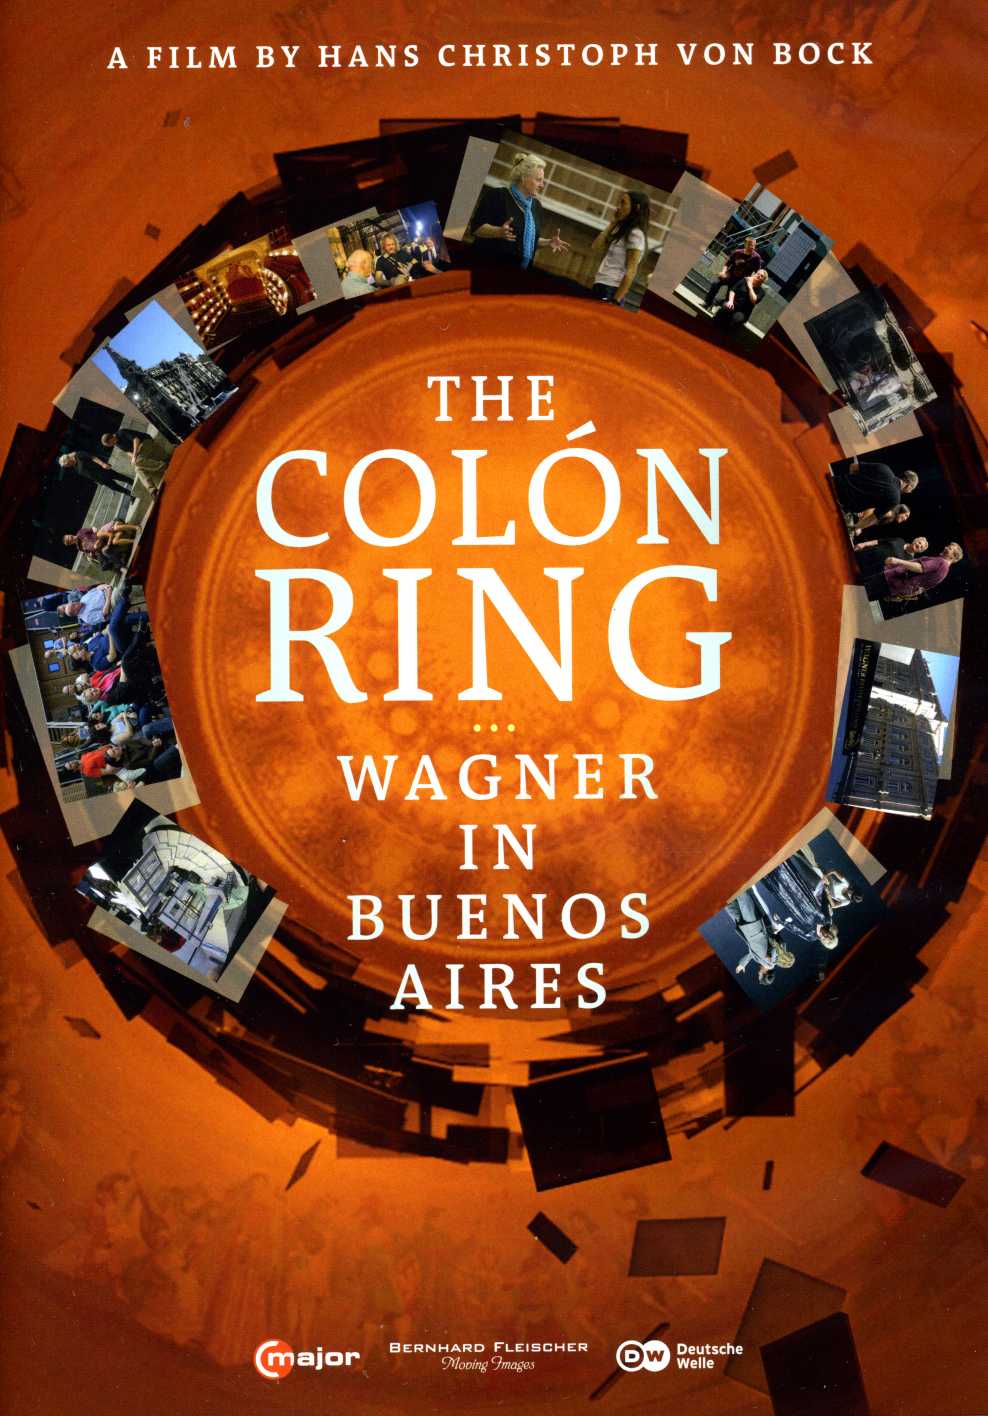 COLON RING: WAGNER IN BUENOS AIRES